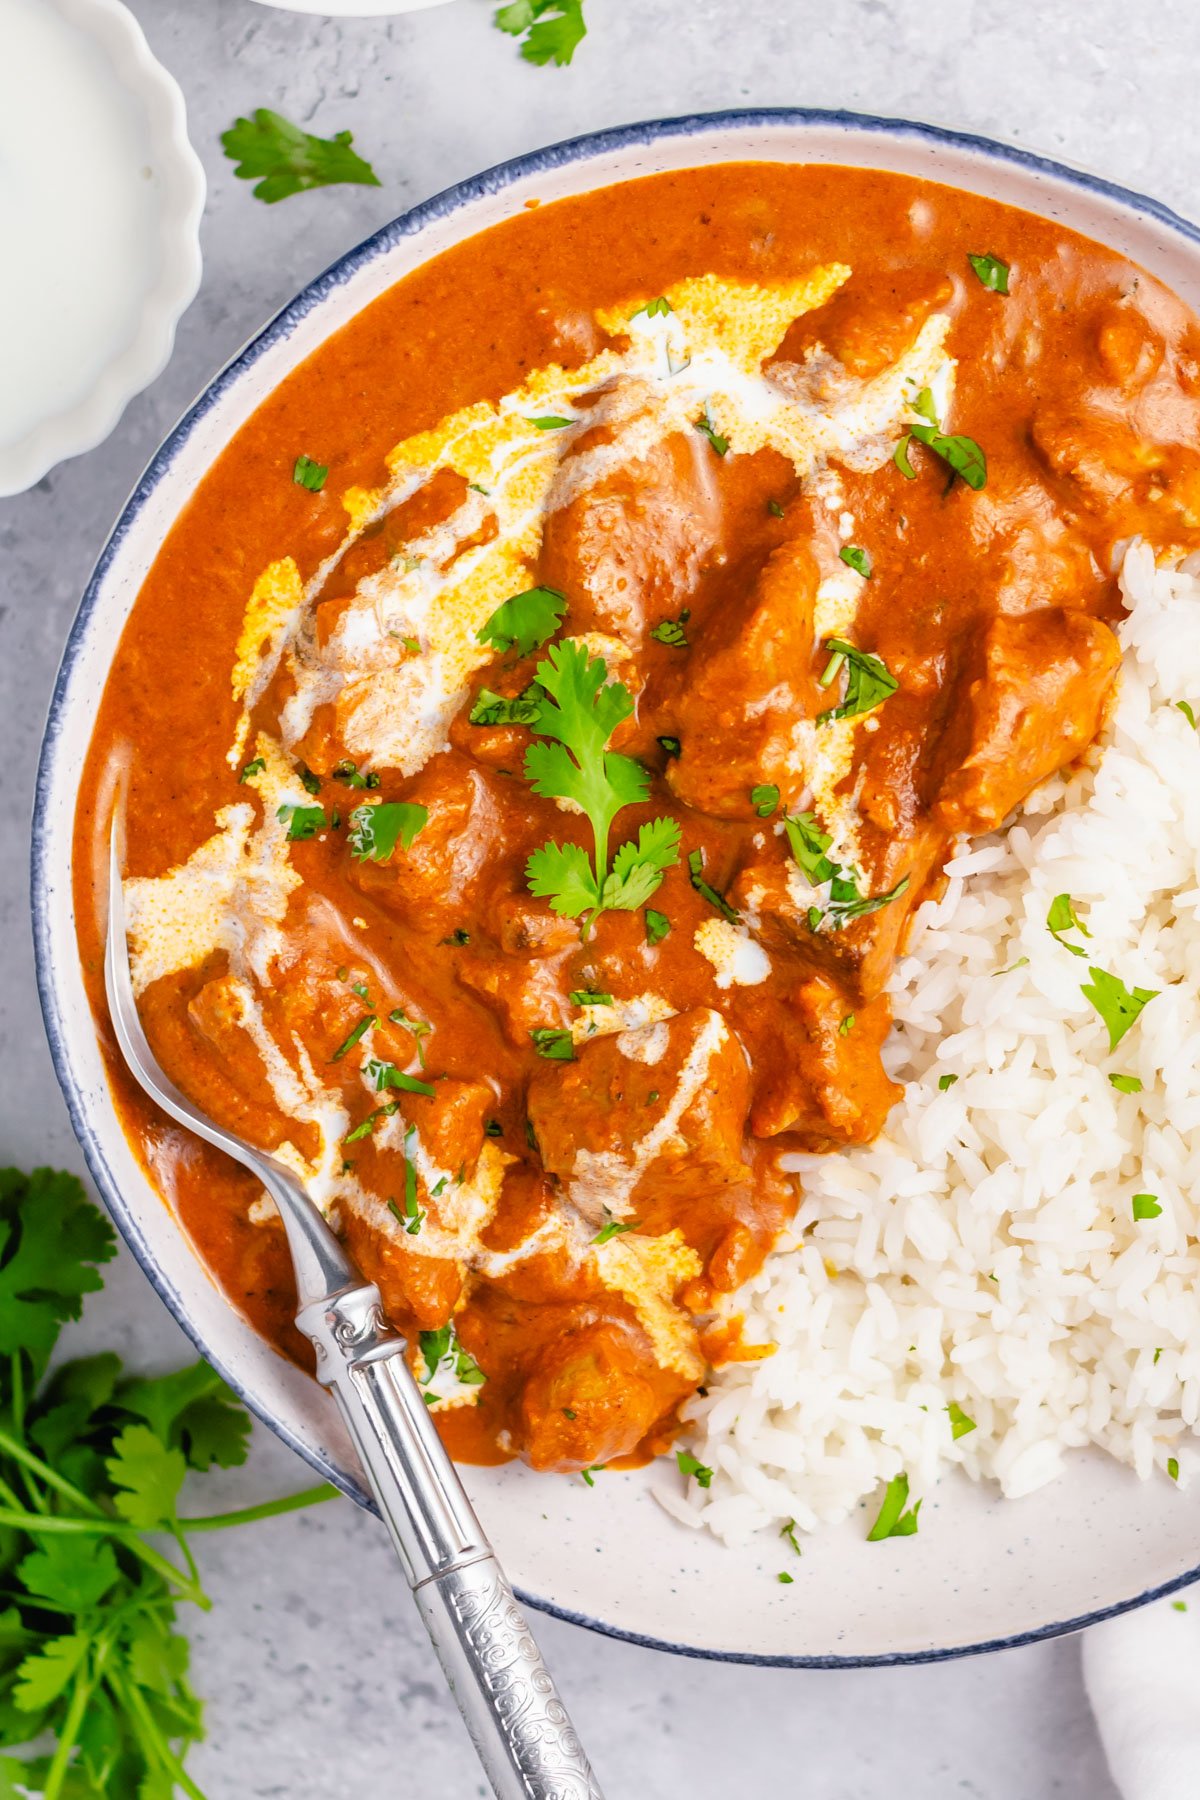 This Whole30 instant pot butter chicken couldn't be easier to make. It's Paleo, gluten-free, keto and takes under 30 minutes from start to finish. This low carb, totally delicious Indian dish is a simple recipe but packs a ton of flavor and only has a cook time of 10 minutes in the pressure cooker. It's a great recipe for meal prep or just for a quick family friendly weeknight meal. #whole30recipes #whole30instantpot #instantpotbutterchicken #whole30chicken #ketoinstantpot